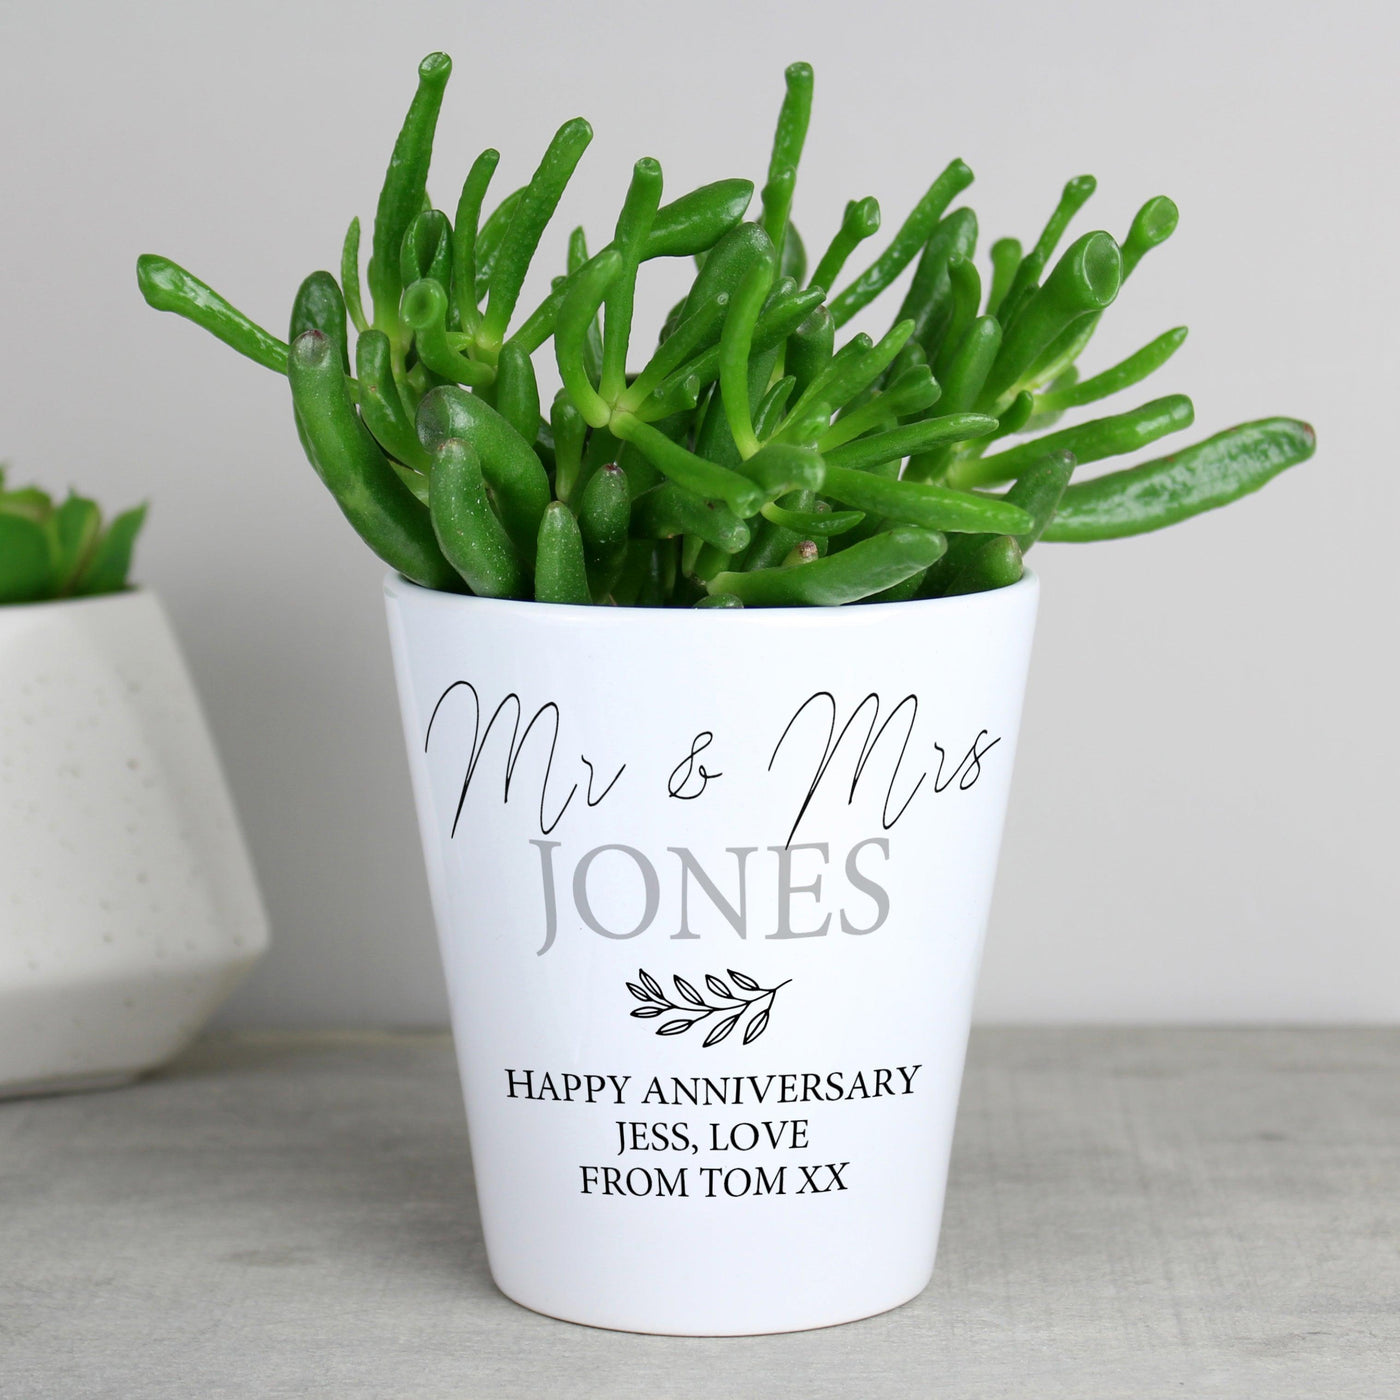 Personalised Free Text Ceramic Plant Pot - Shop Personalised Gifts